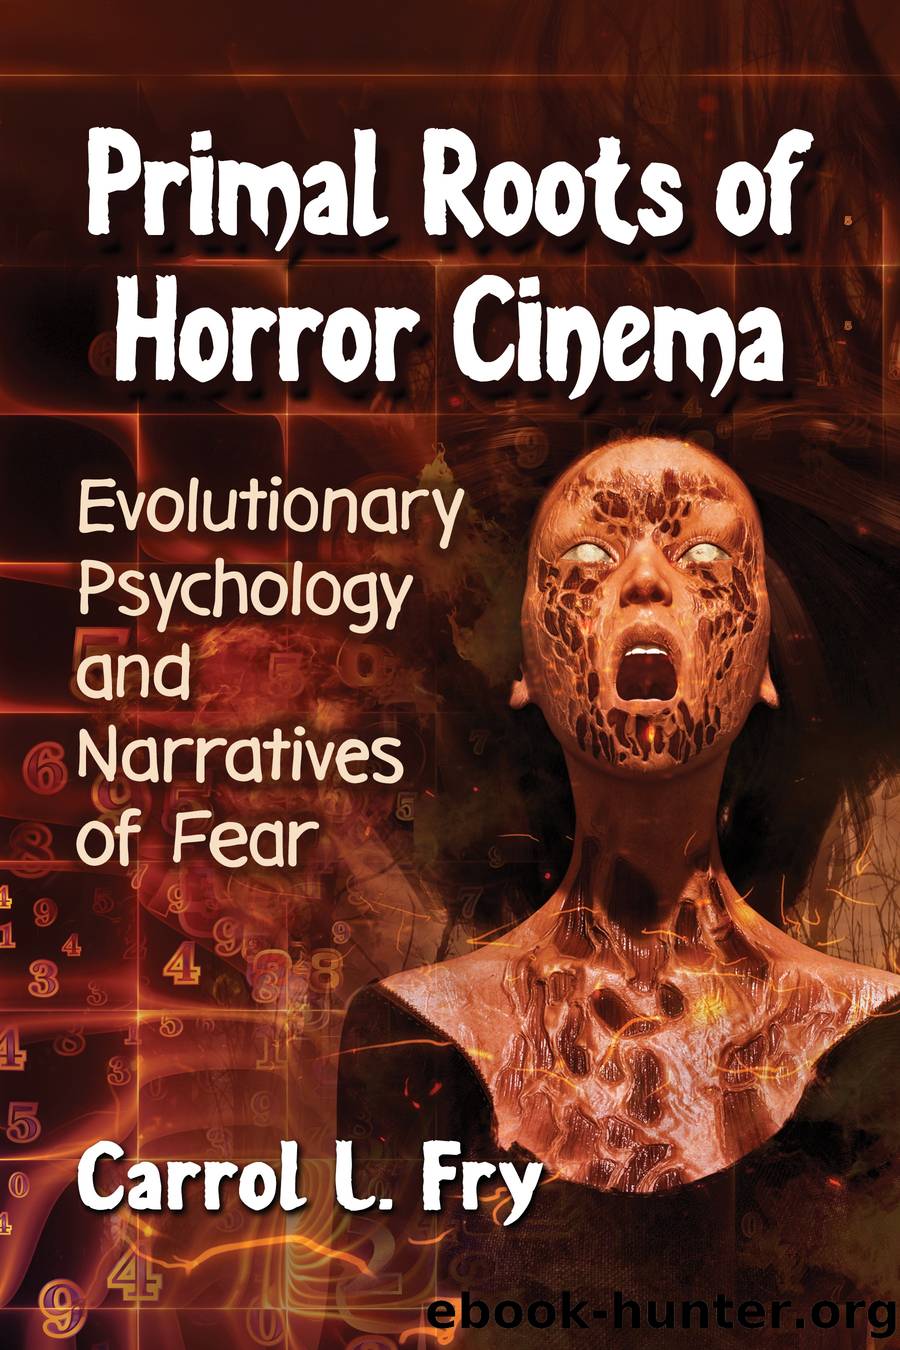 Primal Roots of Horror Cinema by Carrol L. Fry